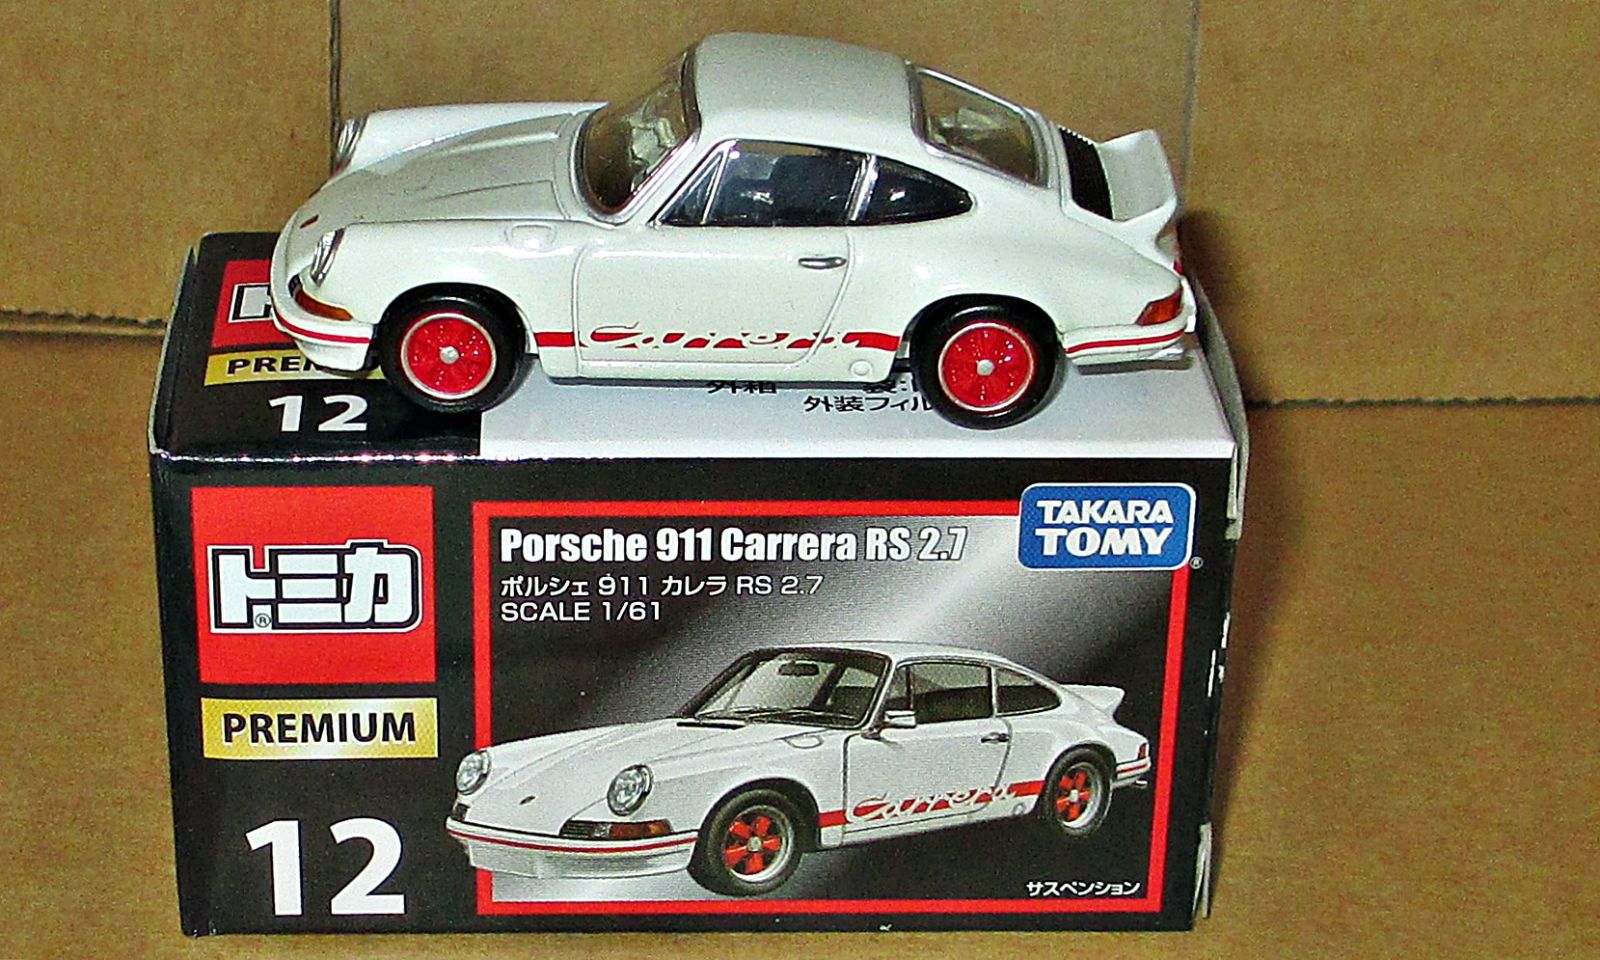 Illustration for article titled Teutonic Tuesday: A first look at the Tomica Porsche 911 Carrera RS 2.7